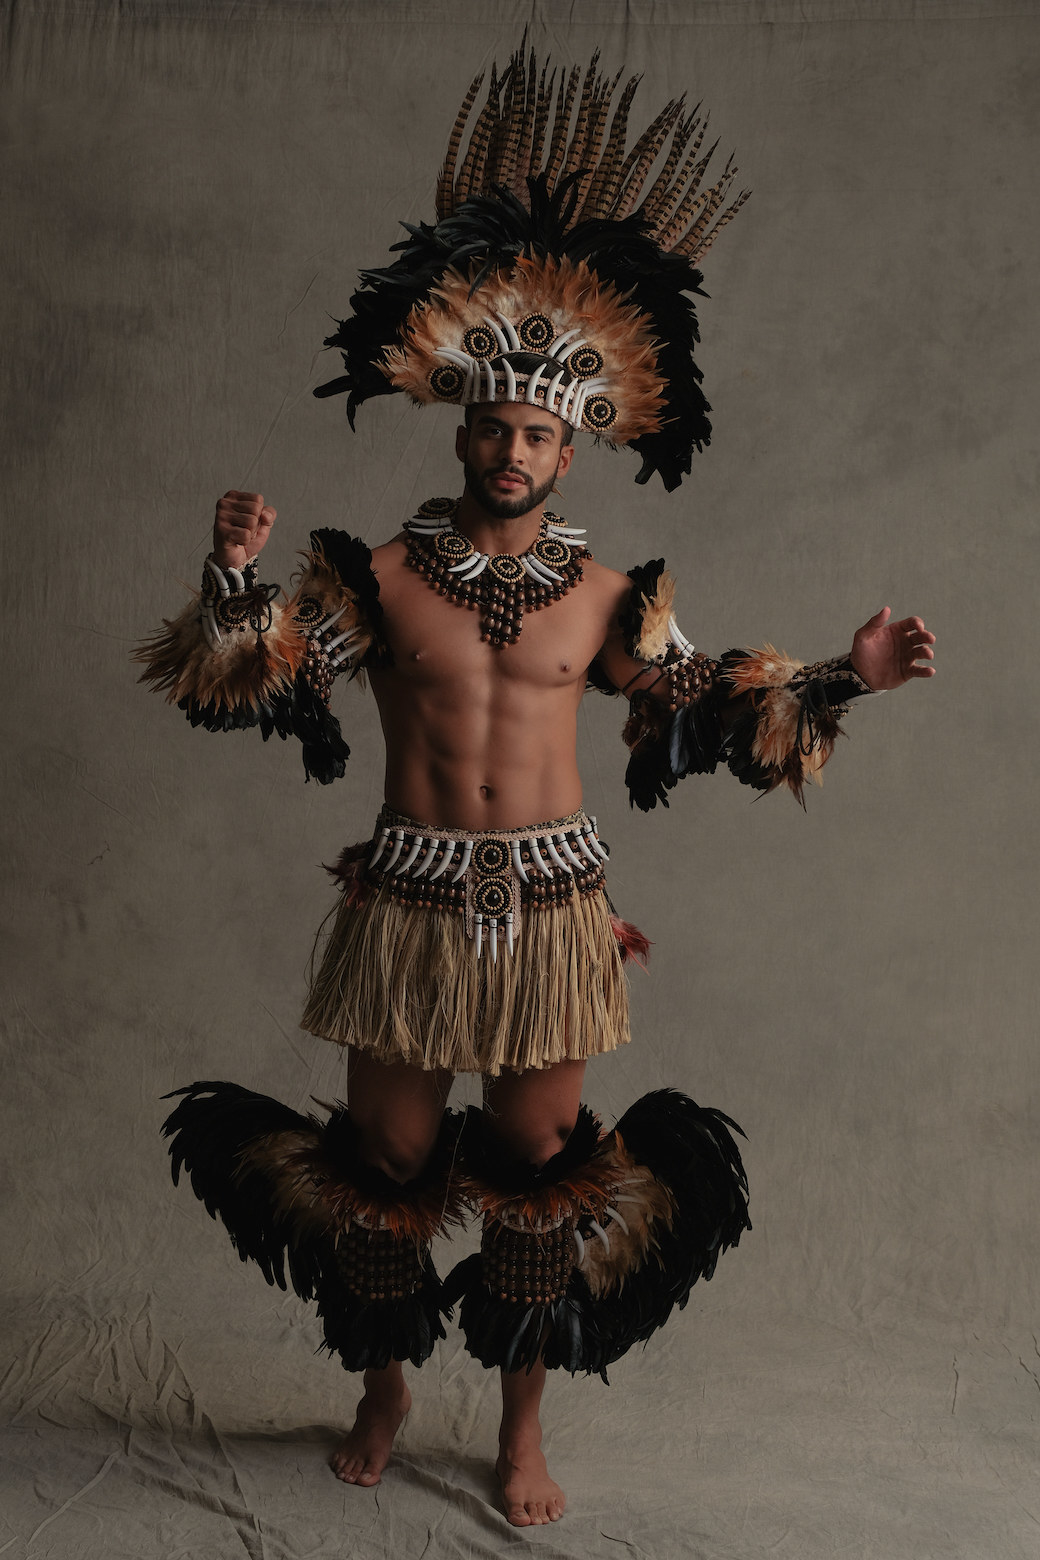 A man in a tribal costume